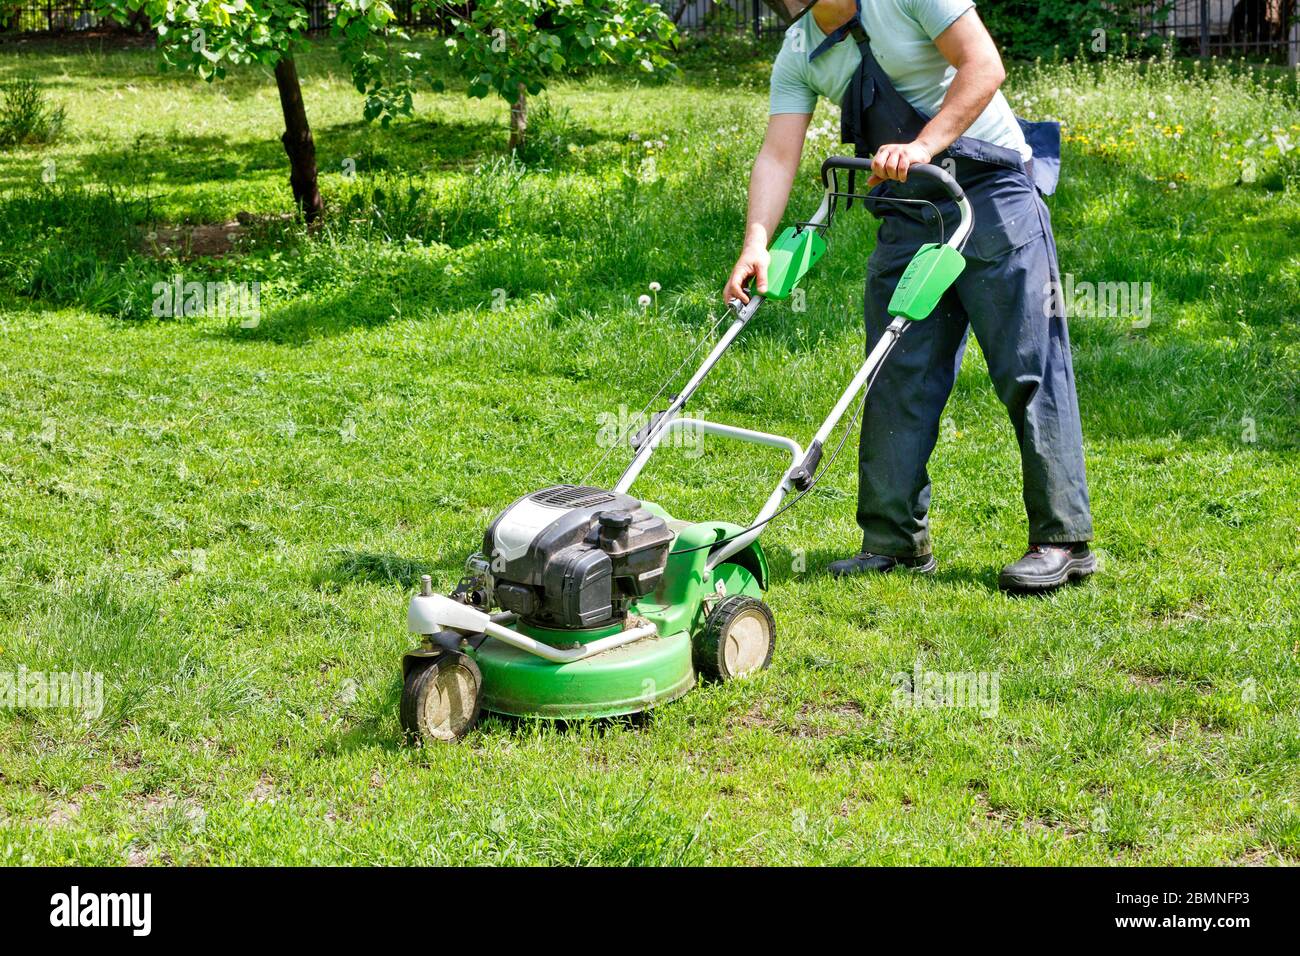 An industrial petrol, mower is ready to go and the gardener launches it to care for the green lawn in the city park, image with copy space. Stock Photo